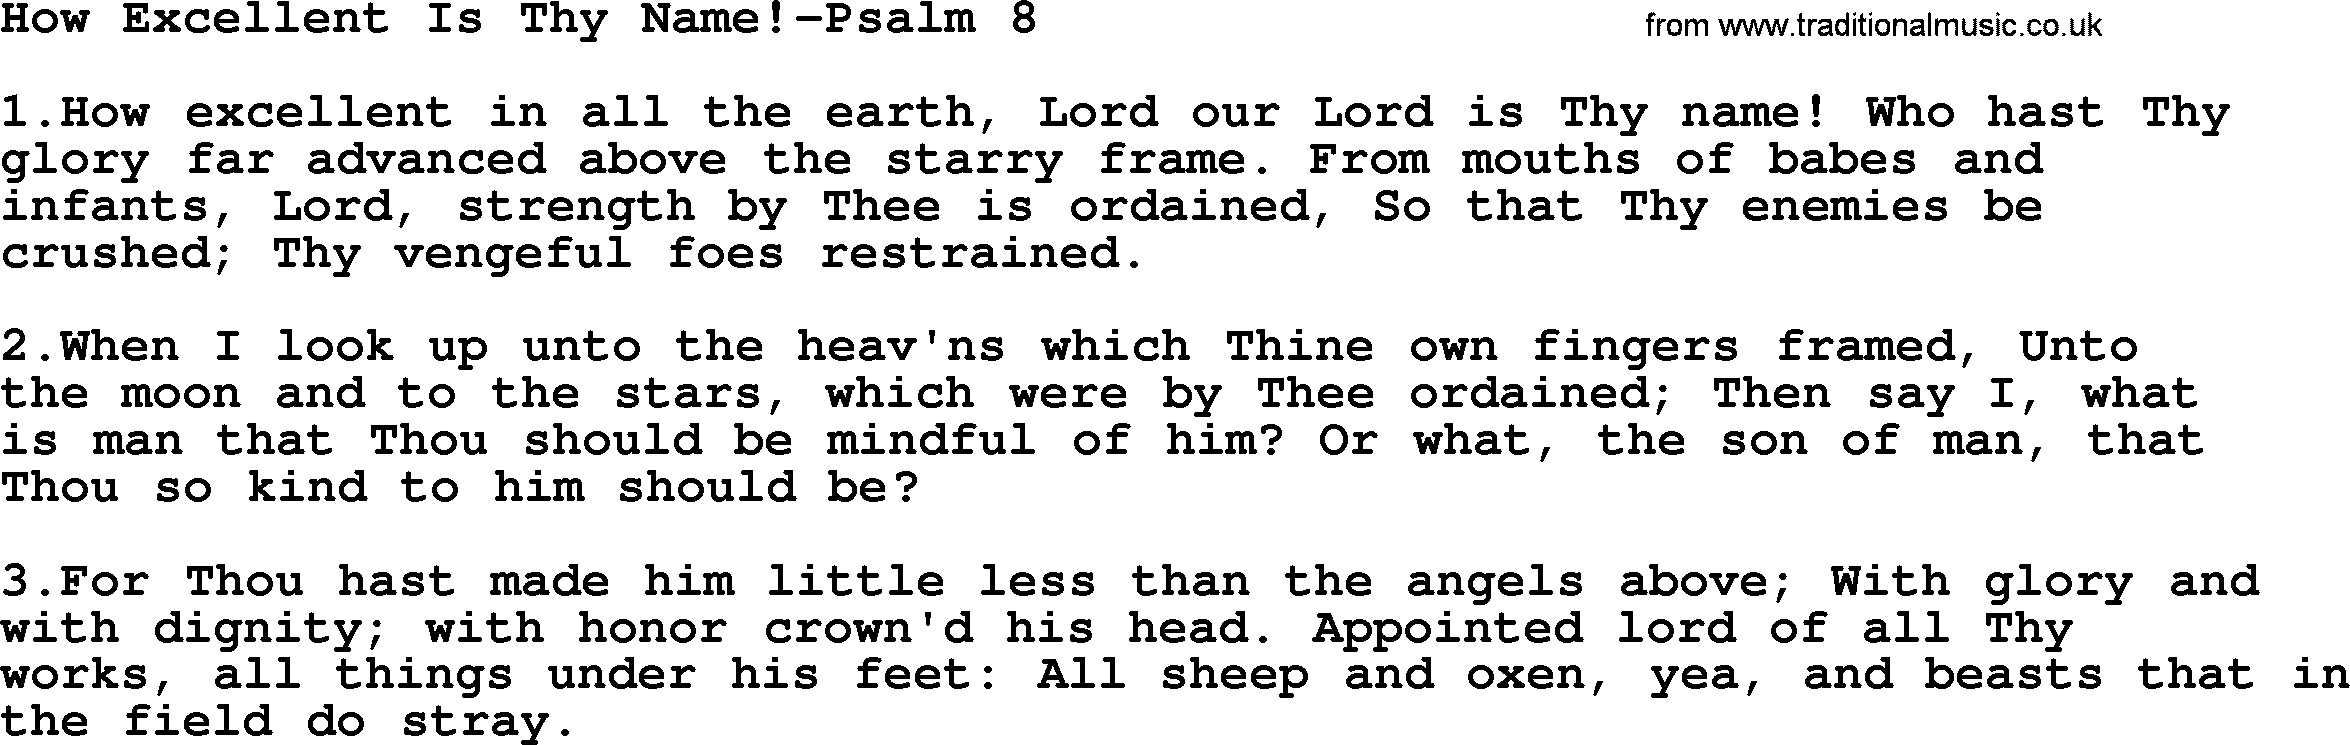 Hymns from the Psalms, Hymn: How Excellent Is Thy Name!-Psalm 8, lyrics with PDF